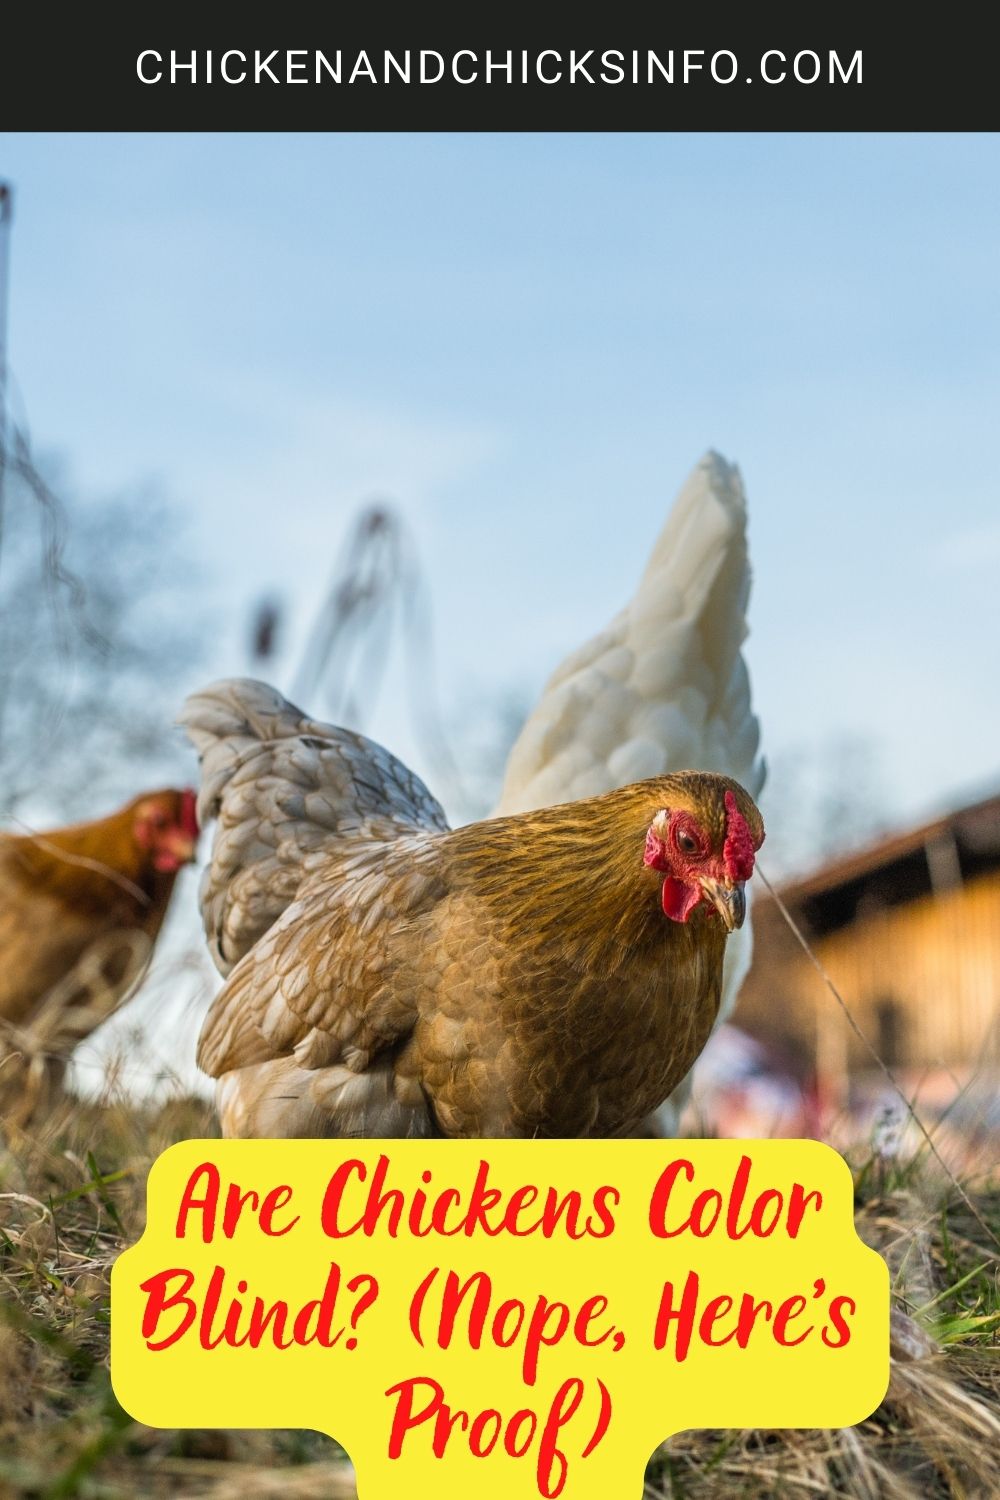 Are Chickens Color Blind? (Nope, Here's Proof) poster.
